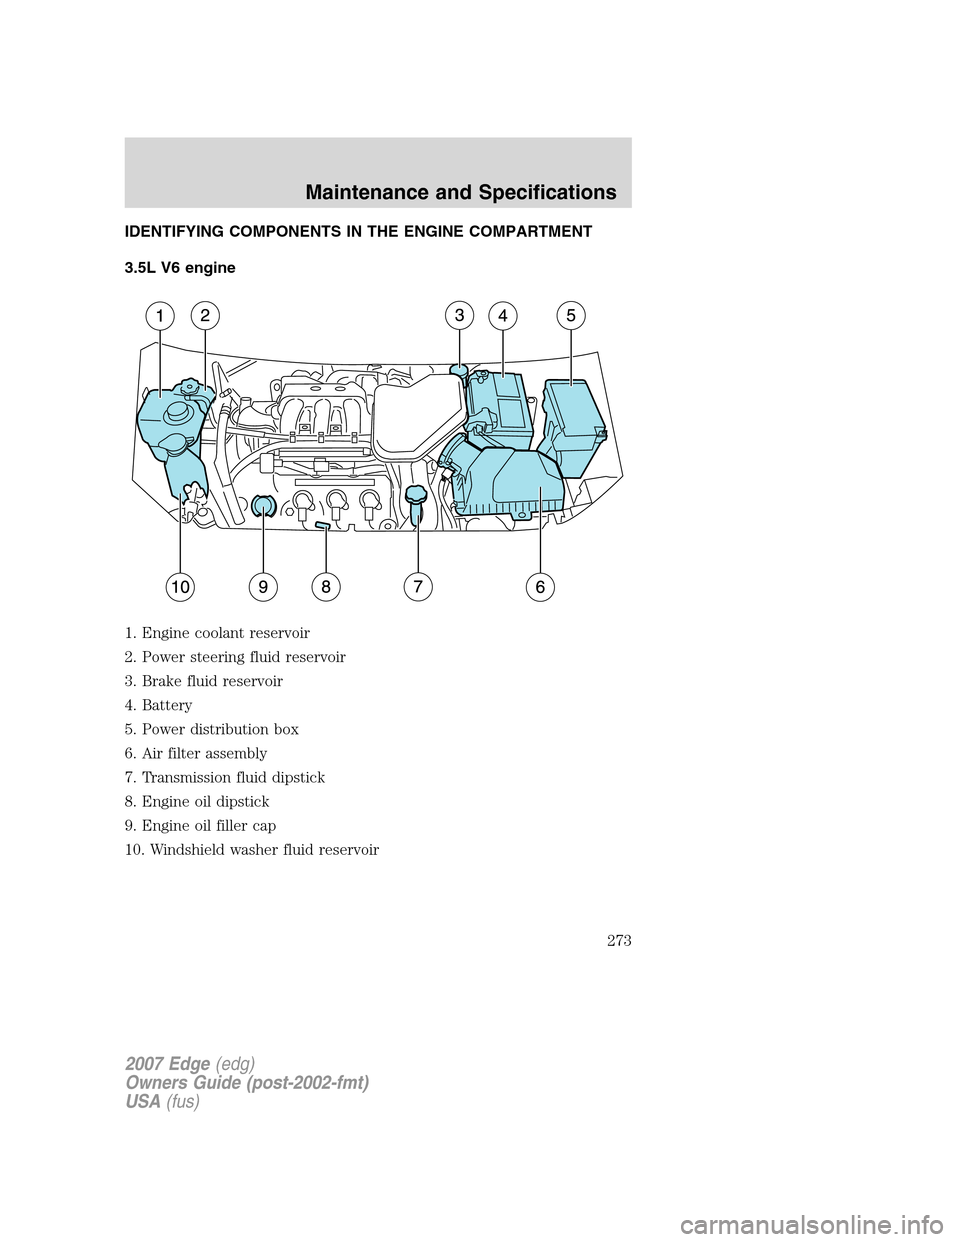 FORD EDGE 2007 1.G Owners Manual IDENTIFYING COMPONENTS IN THE ENGINE COMPARTMENT
3.5L V6 engine
1. Engine coolant reservoir
2. Power steering fluid reservoir
3. Brake fluid reservoir
4. Battery
5. Power distribution box
6. Air filte